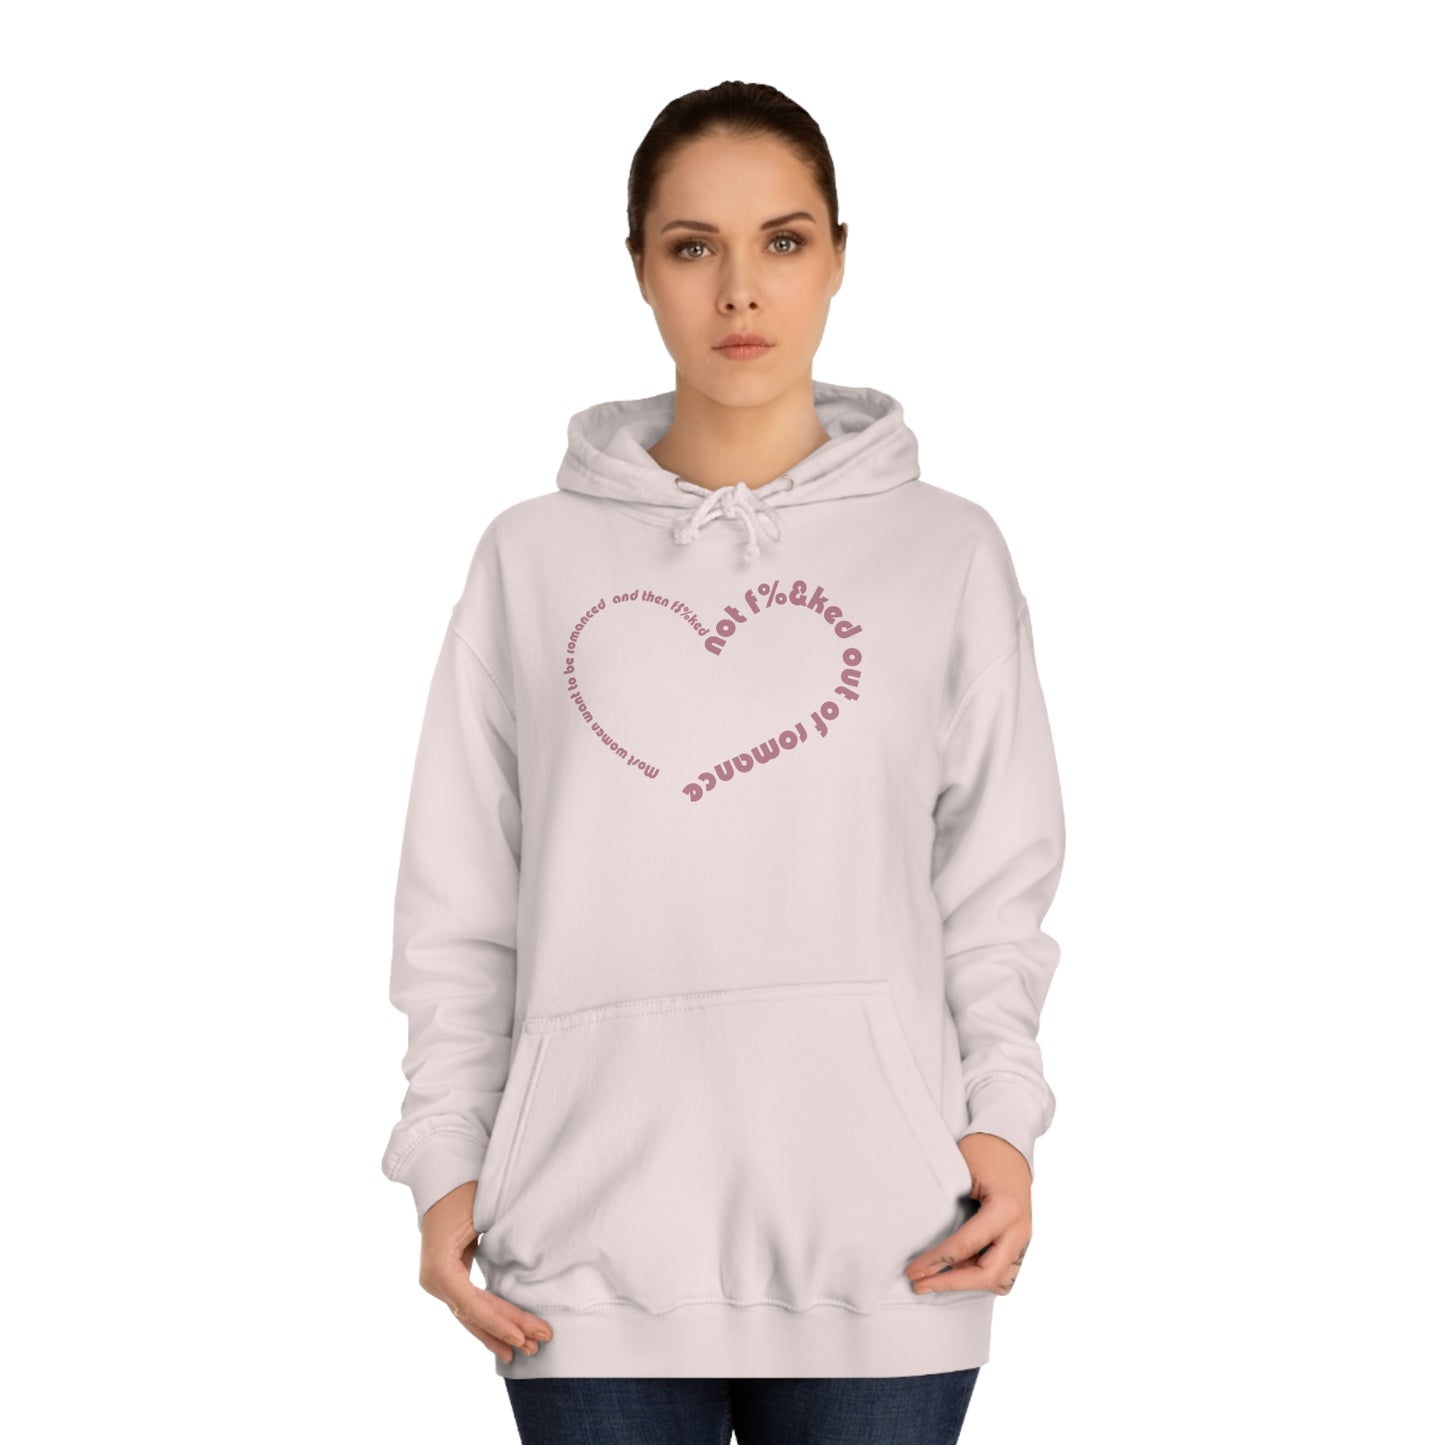 “…Out of Romance” Unisex College Hoodie